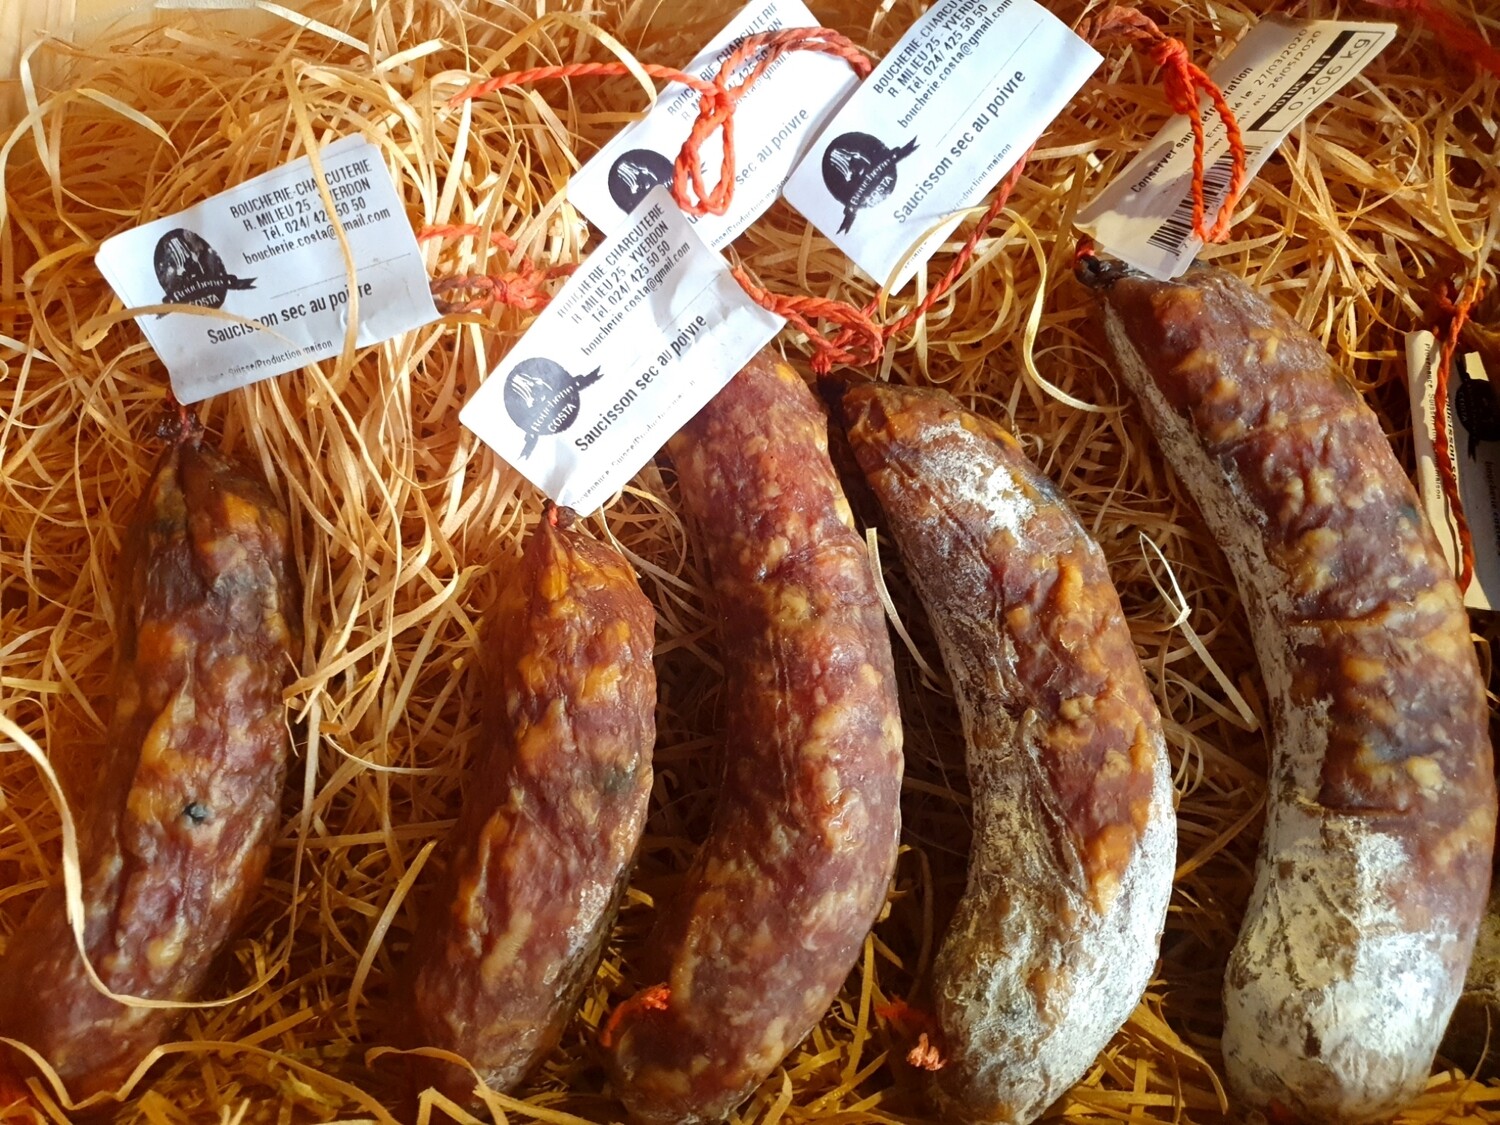 Dry sausage with pepper (Switzerland)